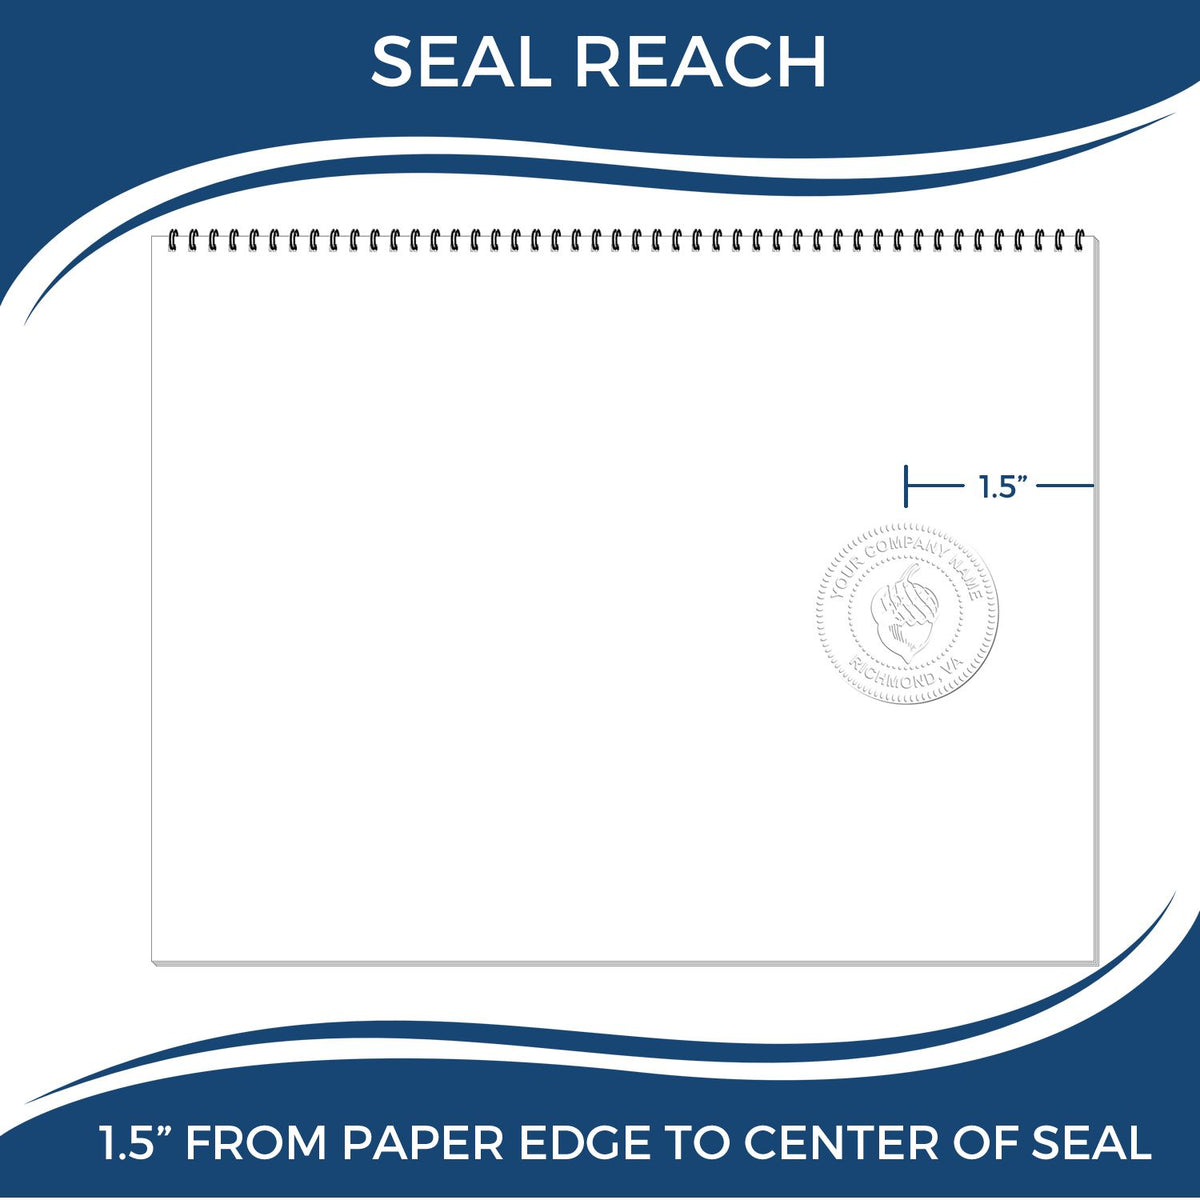 An infographic showing the seal reach which is represented by a ruler and a miniature seal image of the Gift Rhode Island Architect Seal